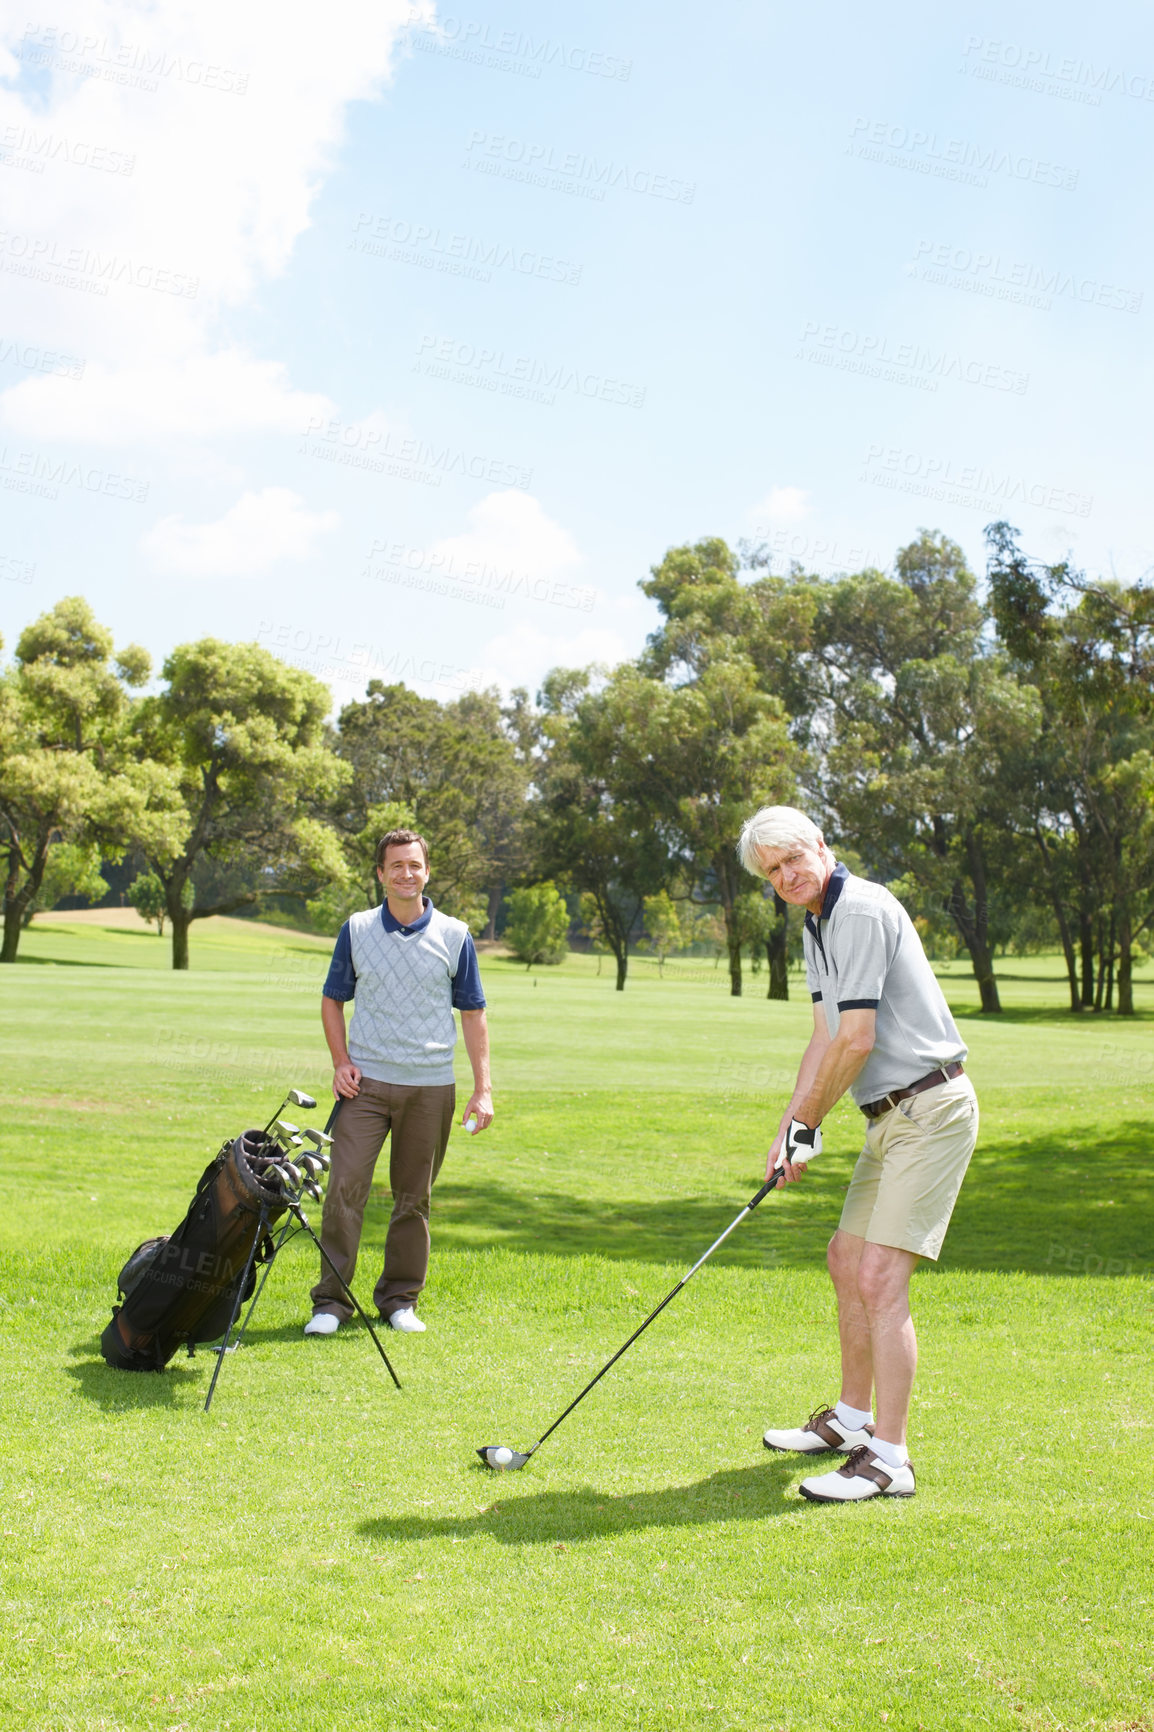 Buy stock photo Golfing companions out on the course playing a round of golf